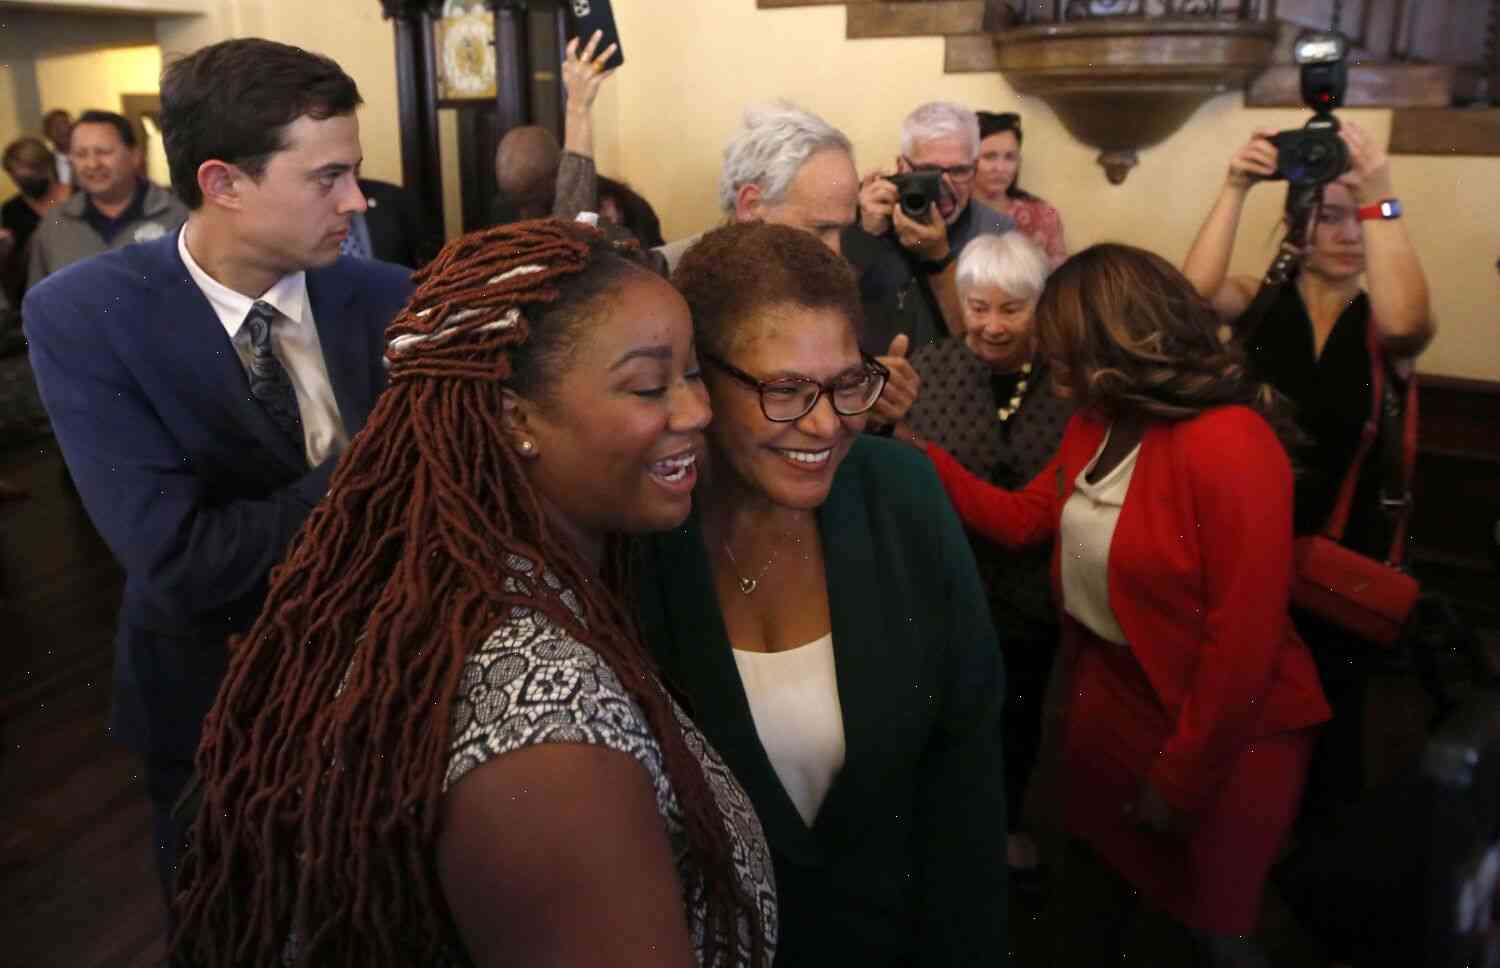 The Black Business Community is lining up behind Karen Bass